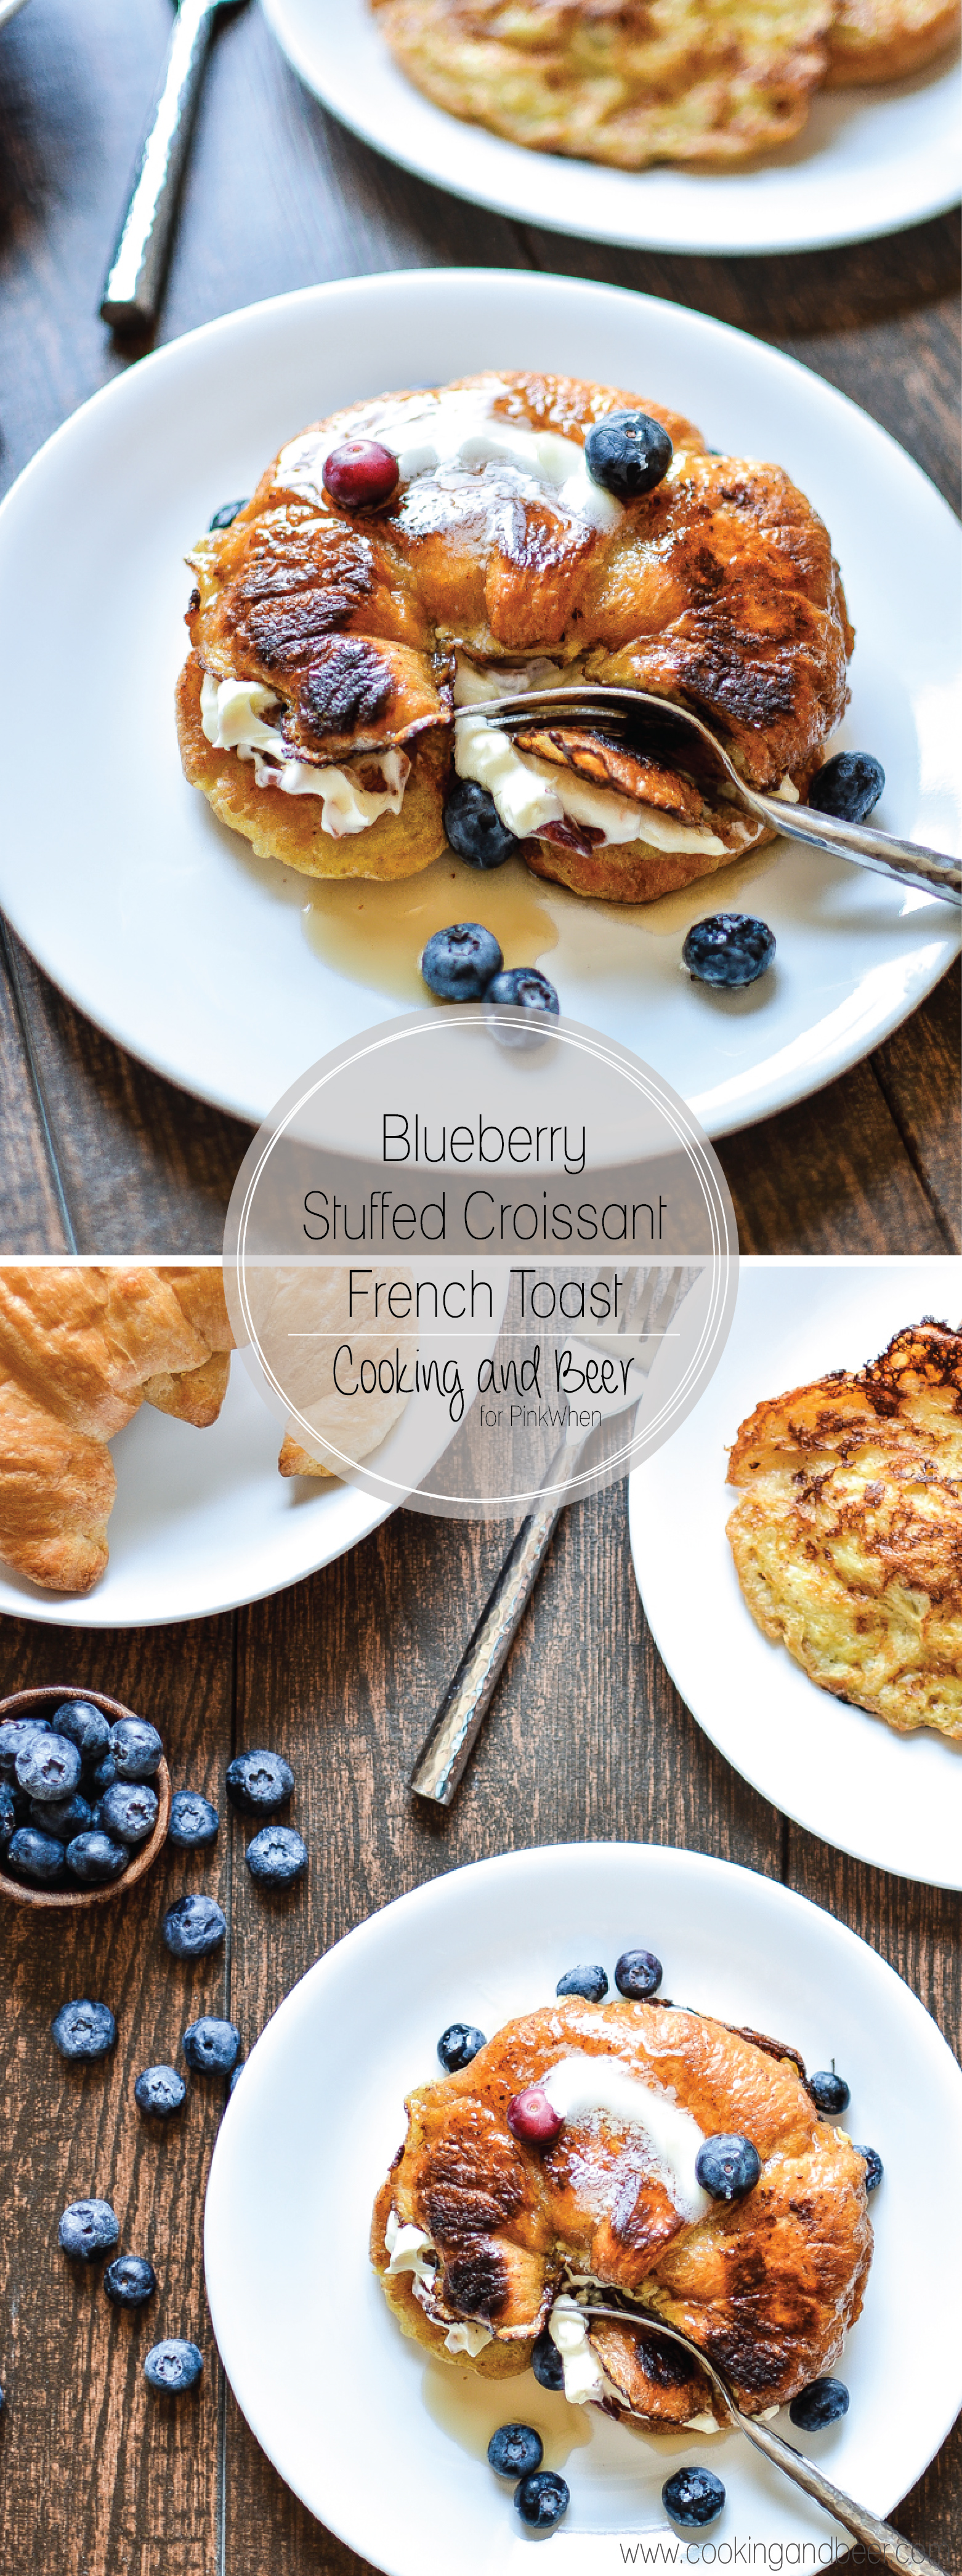 Blueberry Stuffed Croissant French Toast with Bacon: a weekend brunch indulgence that you've got to try! | www.cookingandbeer.com